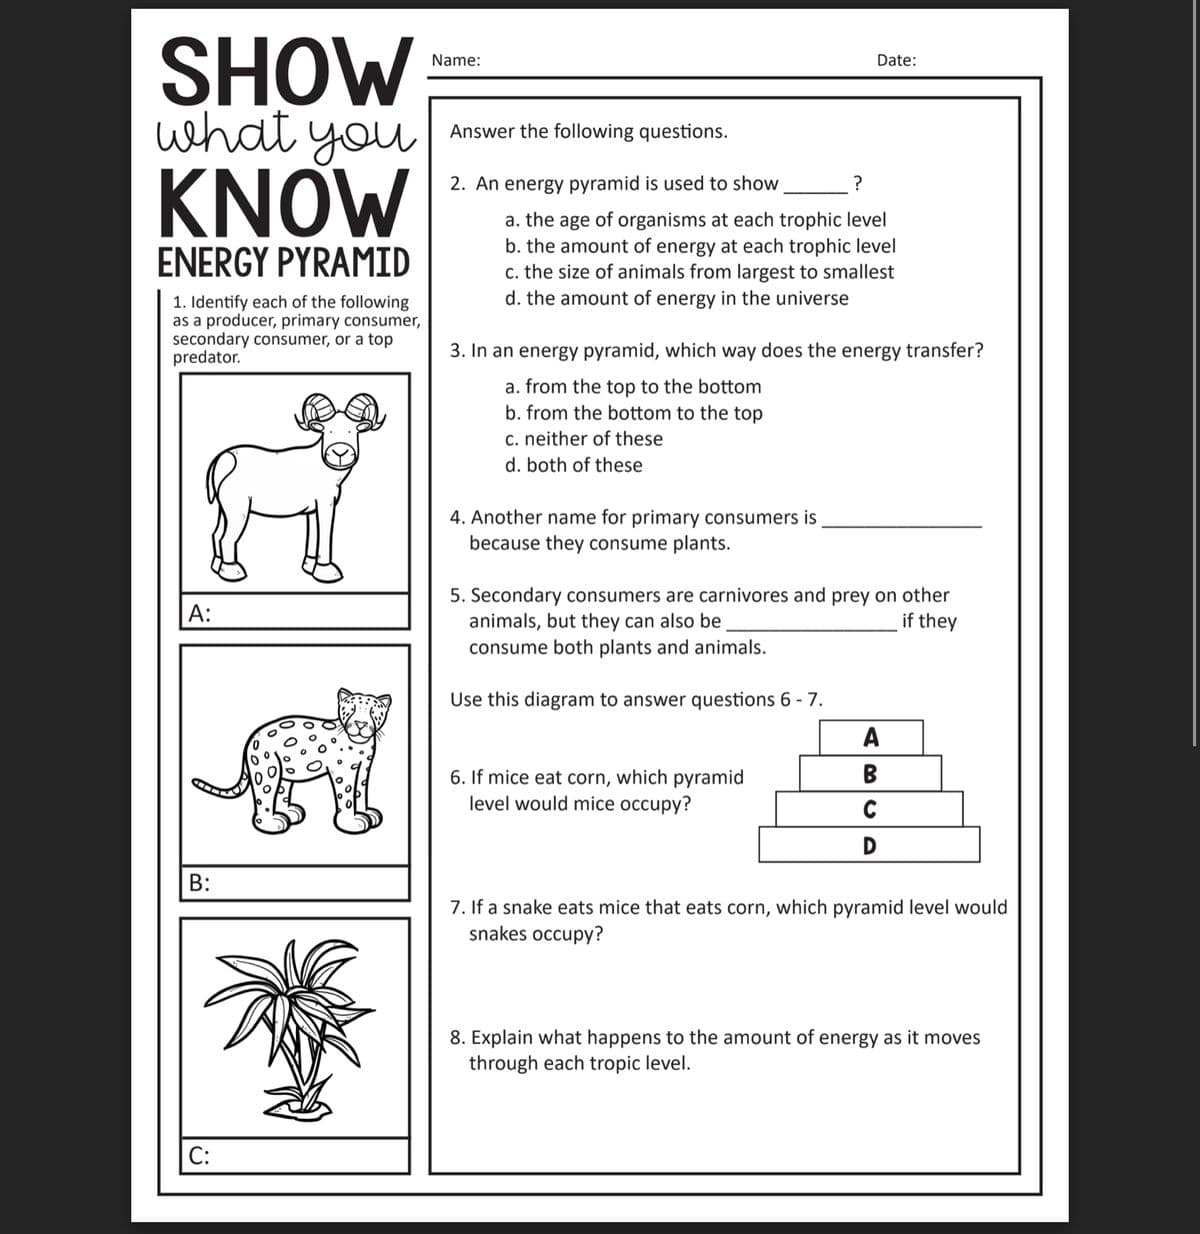 SHOW
what you
KNOW
Name:
Date:
Answer the following questions.
2. An energy pyramid is used to show
?
a. the age of organisms at each trophic level
b. the amount of energy at each trophic level
c. the size of animals from largest to smallest
d. the amount of energy in the universe
ENERGY PYRAMID
1. Identify each of the following
as a producer, primary consumer,
secondary consumer, or a top
predator.
3. In an energy pyramid, which way does the energy transfer?
a. from the top to the bottom
b. from the bottom to the top
c. neither of these
d. both of these
4. Another name for primary consumers is
because they consume plants.
5. Secondary consumers are carnivores and prey on other
animals, but they can also be
consume both plants and animals.
A:
if they
Use this diagram to answer questions 6 - 7.
A
B
6. If mice eat corn, which pyramid
level would mice occupy?
C
D
B:
7. If a snake eats mice that eats corn, which pyramid level would
snakes occupy?
8. Explain what happens to the amount of energy as it moves
through each tropic level.
С:
